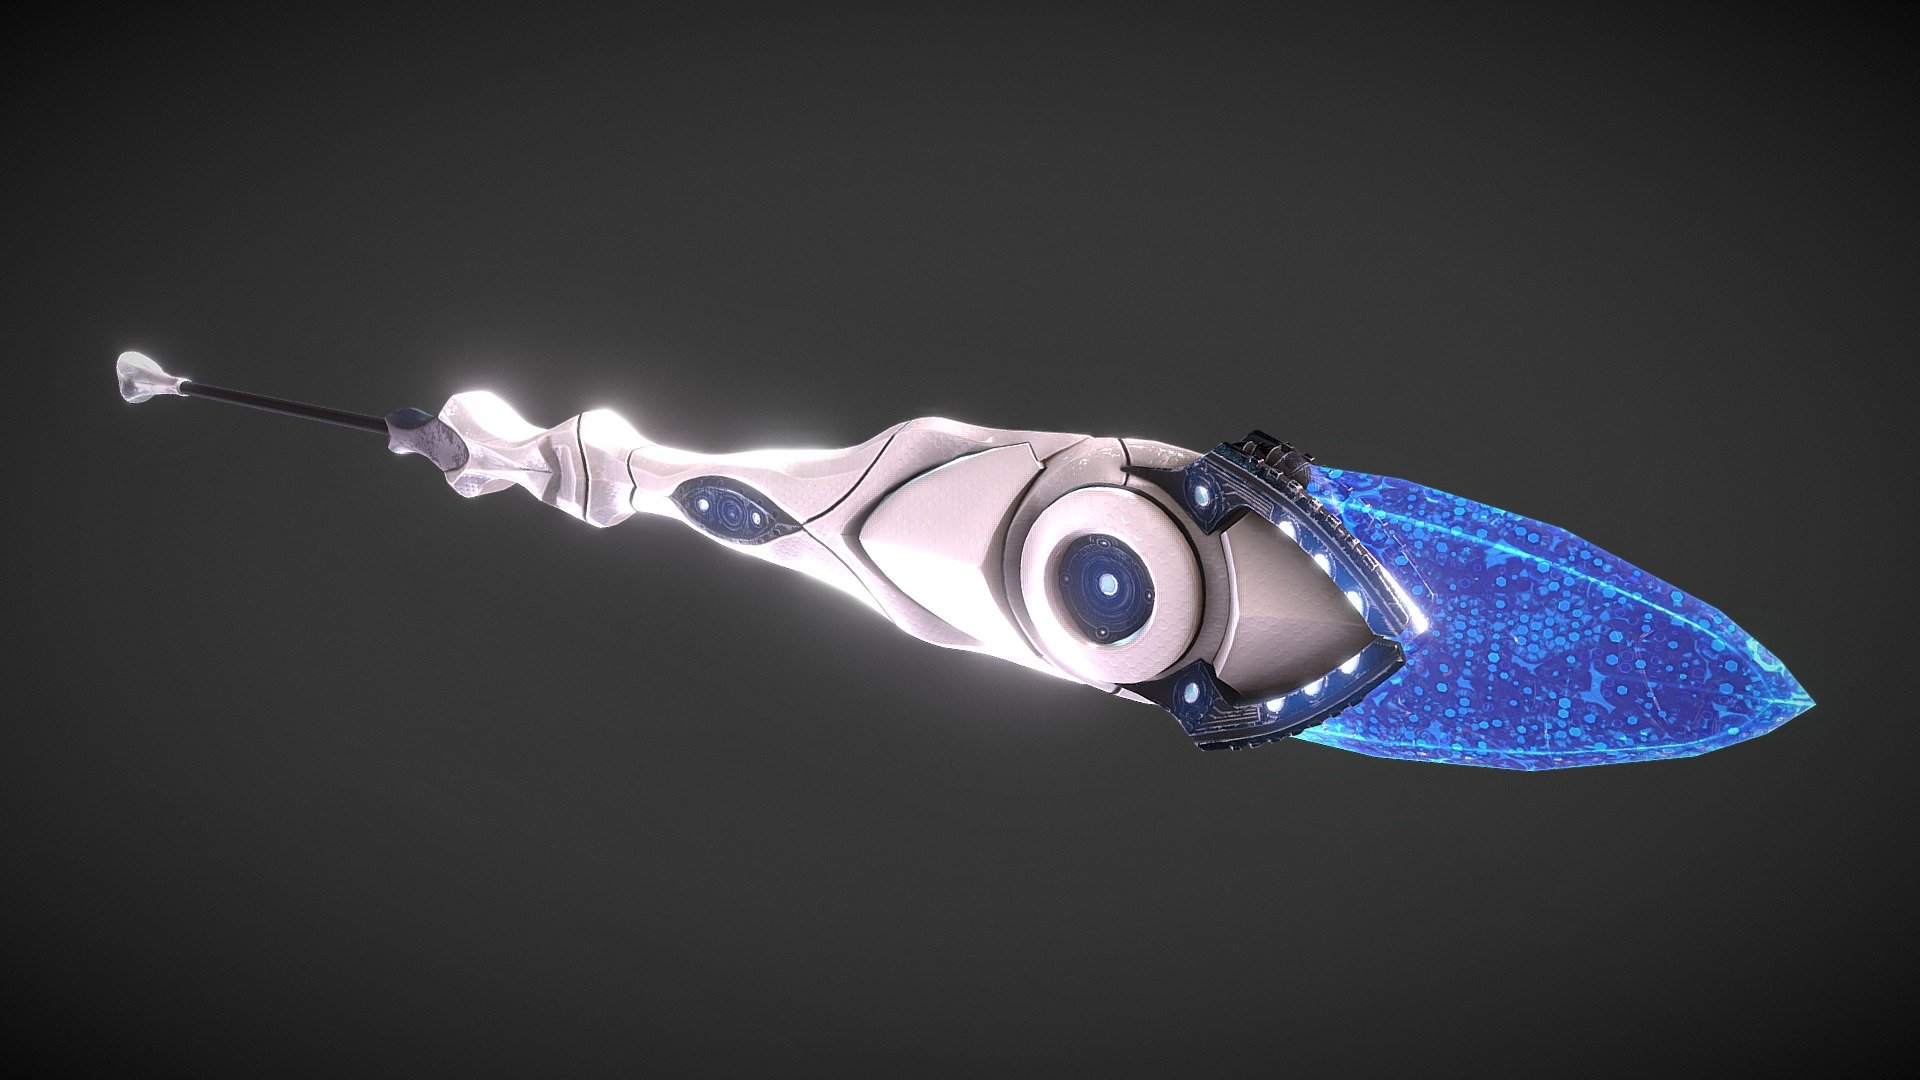 Another part of the SciFi weapon series I’m working on. This dagger has the same specifications as the other weapons in the set and can be used in games or other realtime projects. Full PBR texture set included 3d model